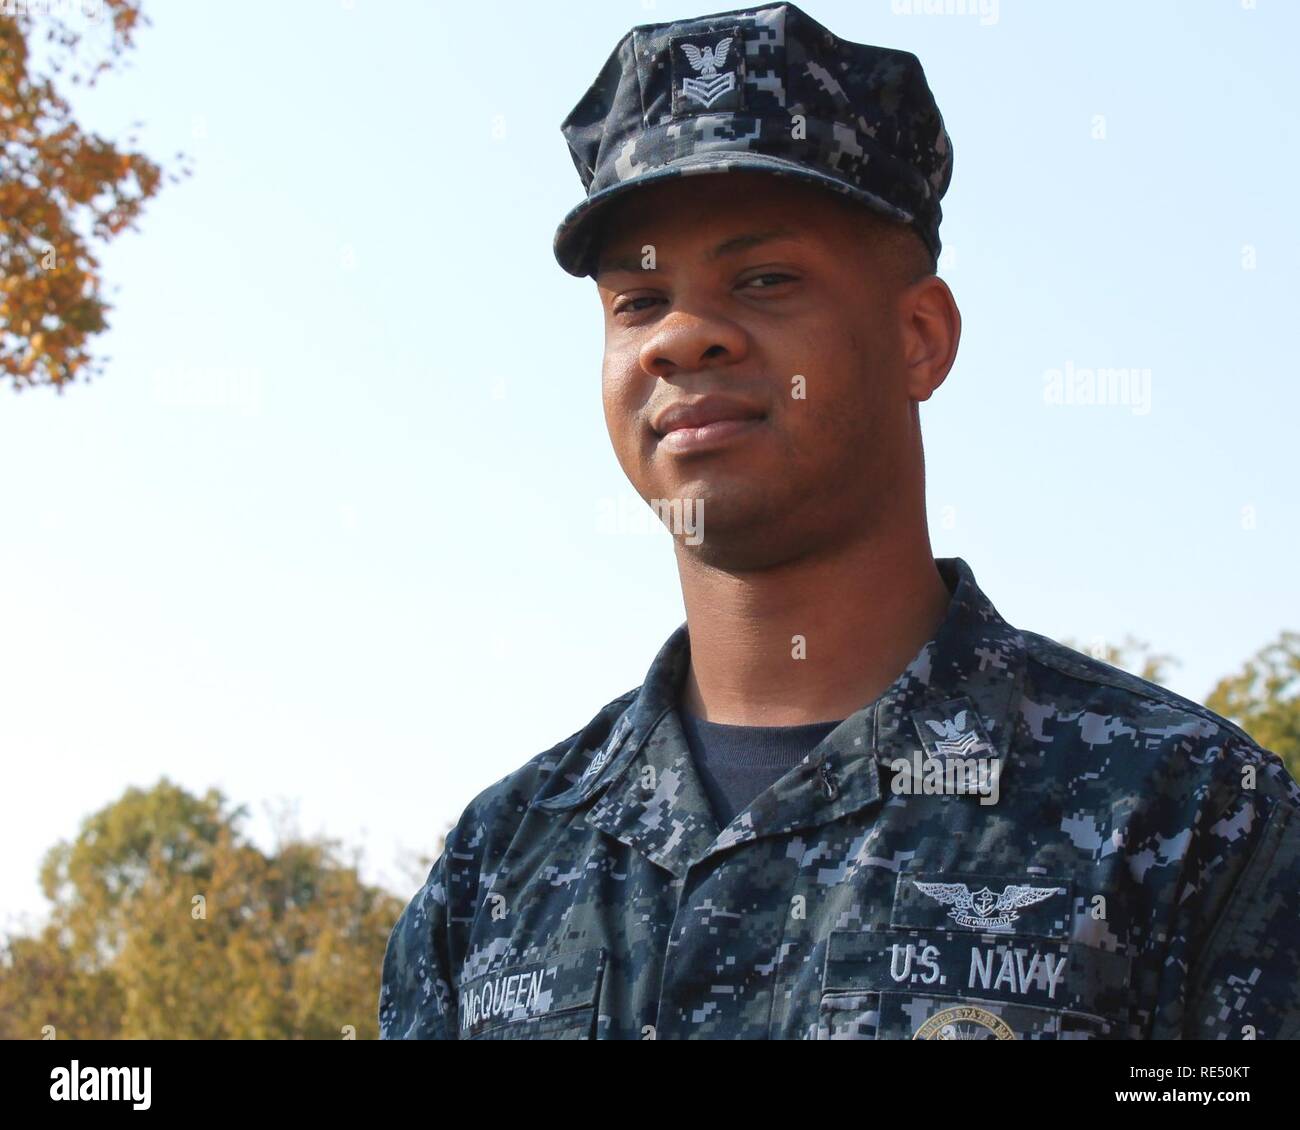 Petty Officer 1st Class Maurice McQueen, Command Career Counselor for Navy Recruiting District Raleigh, stopped to help a pedestrian in need on March 6, 2017. In 2016, the outstanding sailor received the Sailor of the Year Award for Navy Recruiting Command-Region East. Stock Photo